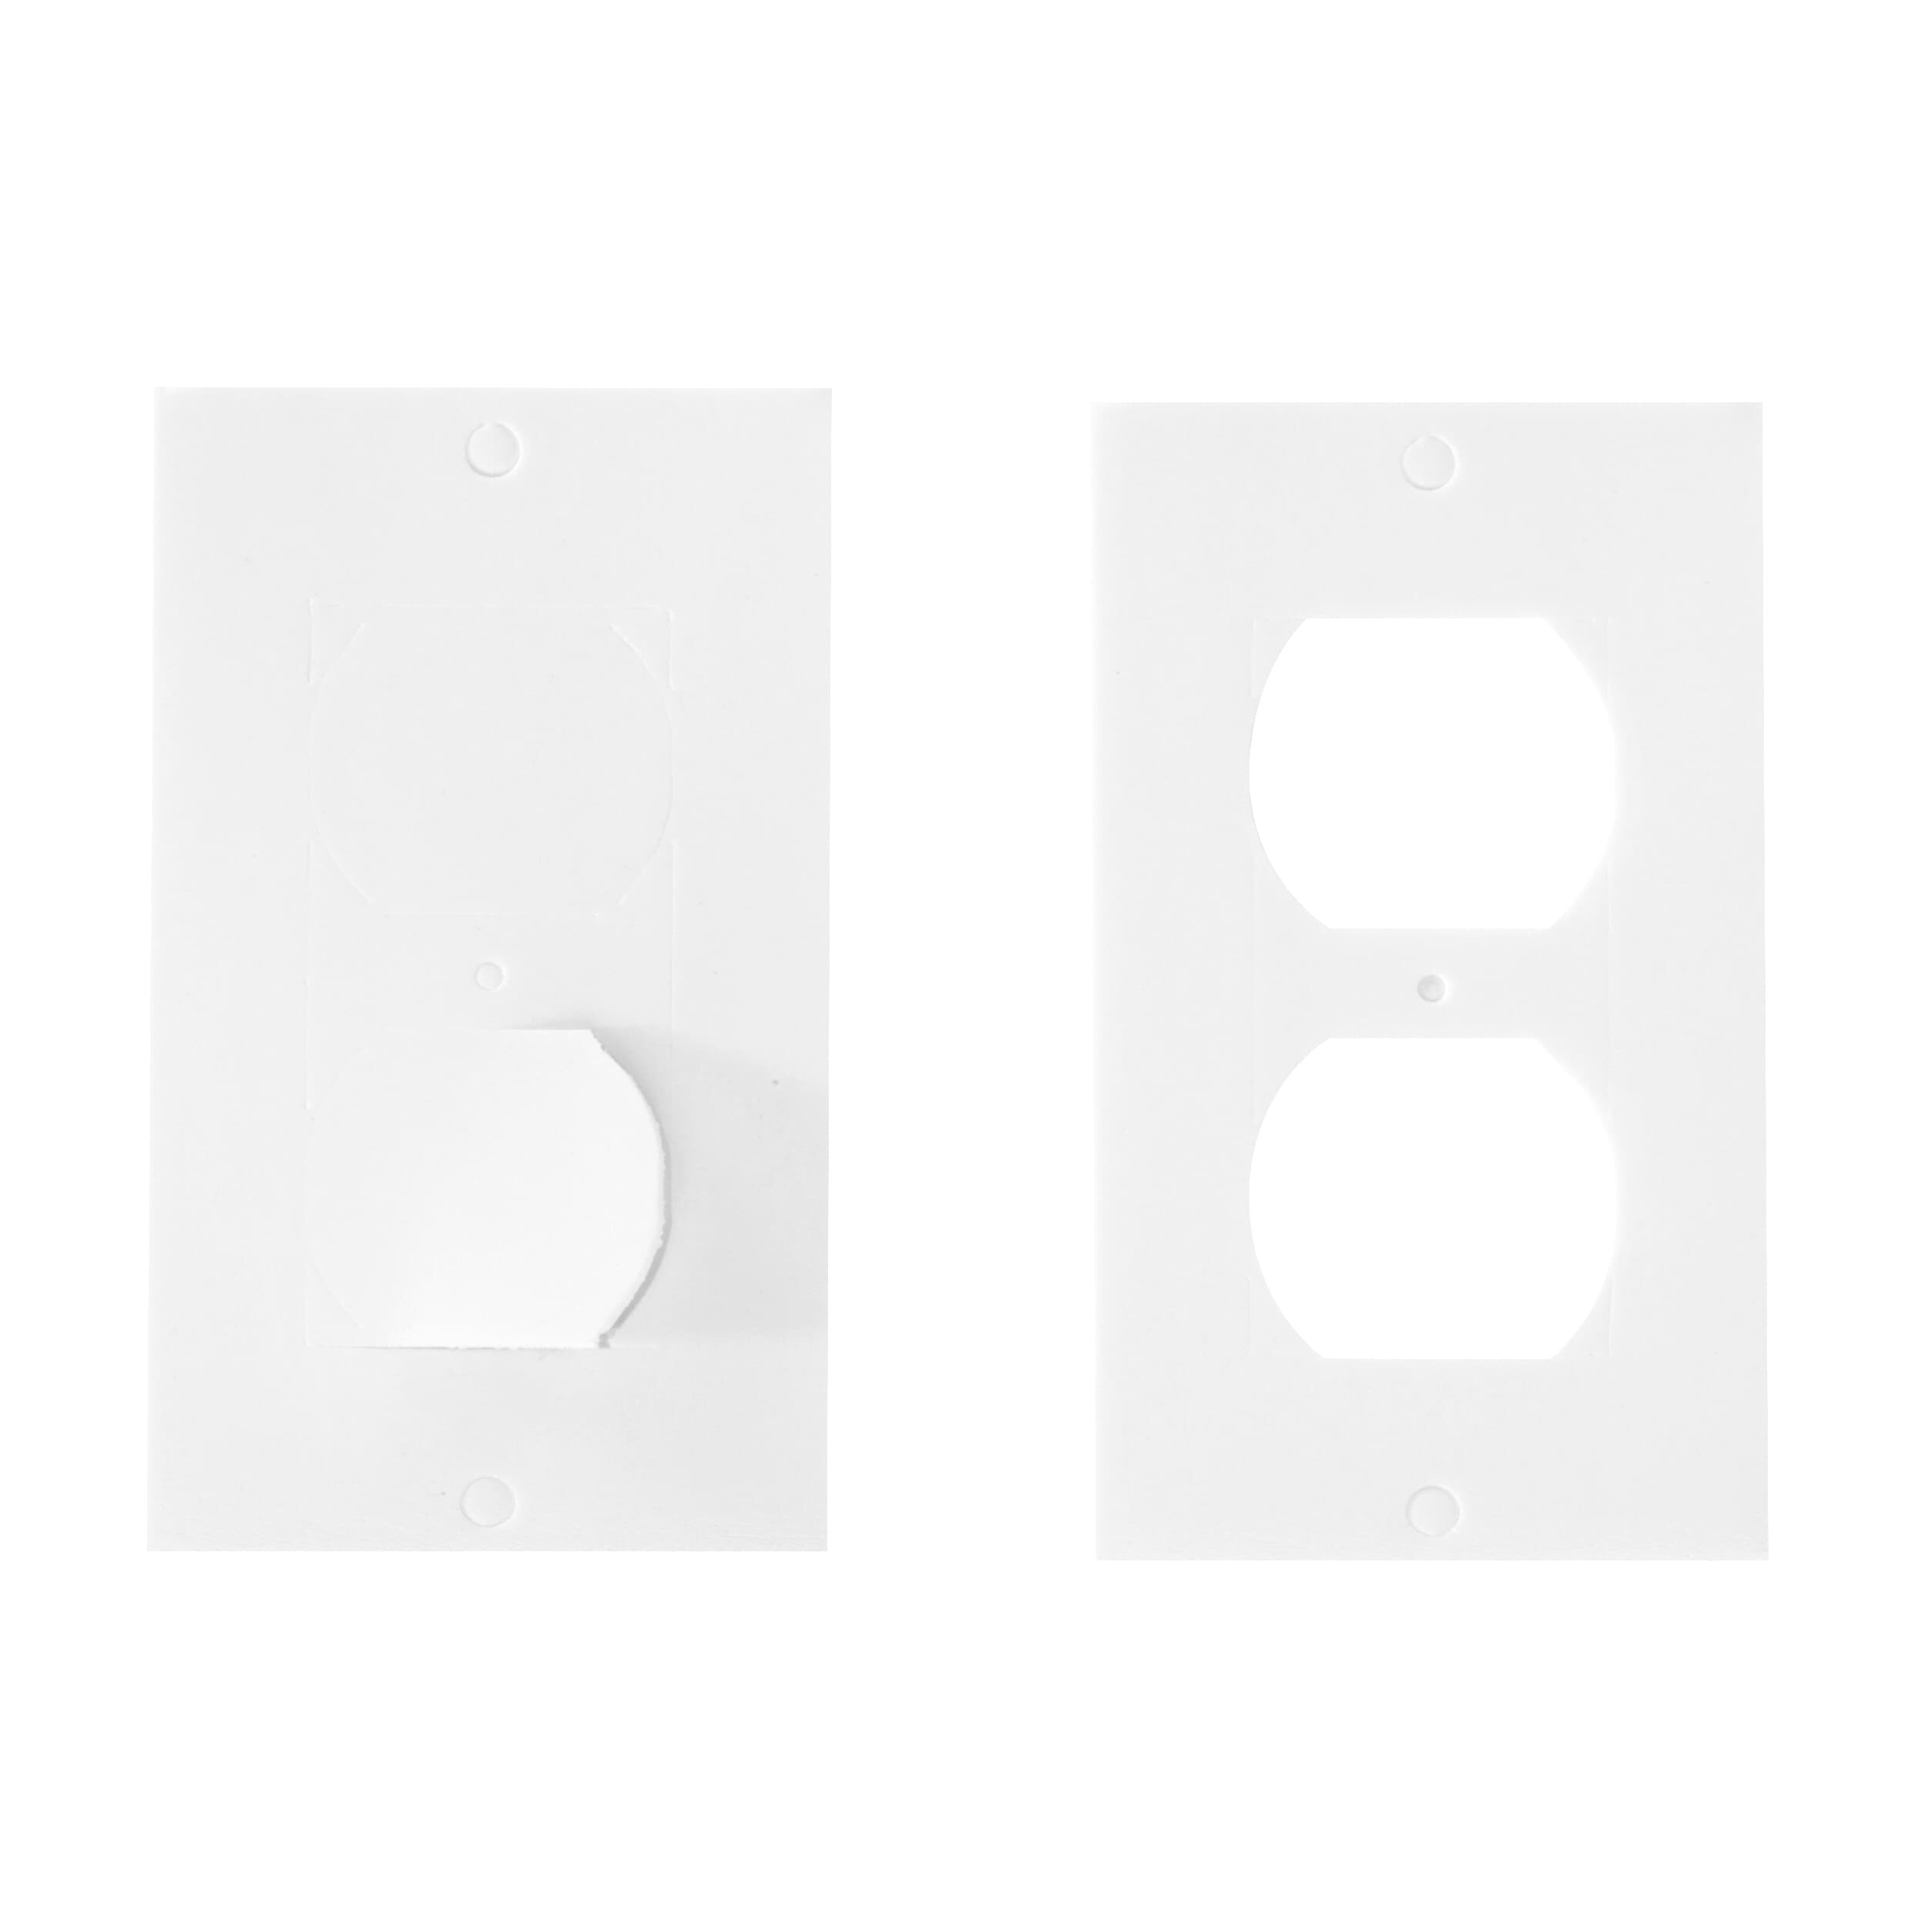 2 Inch White Screen Tape - 6 Pack